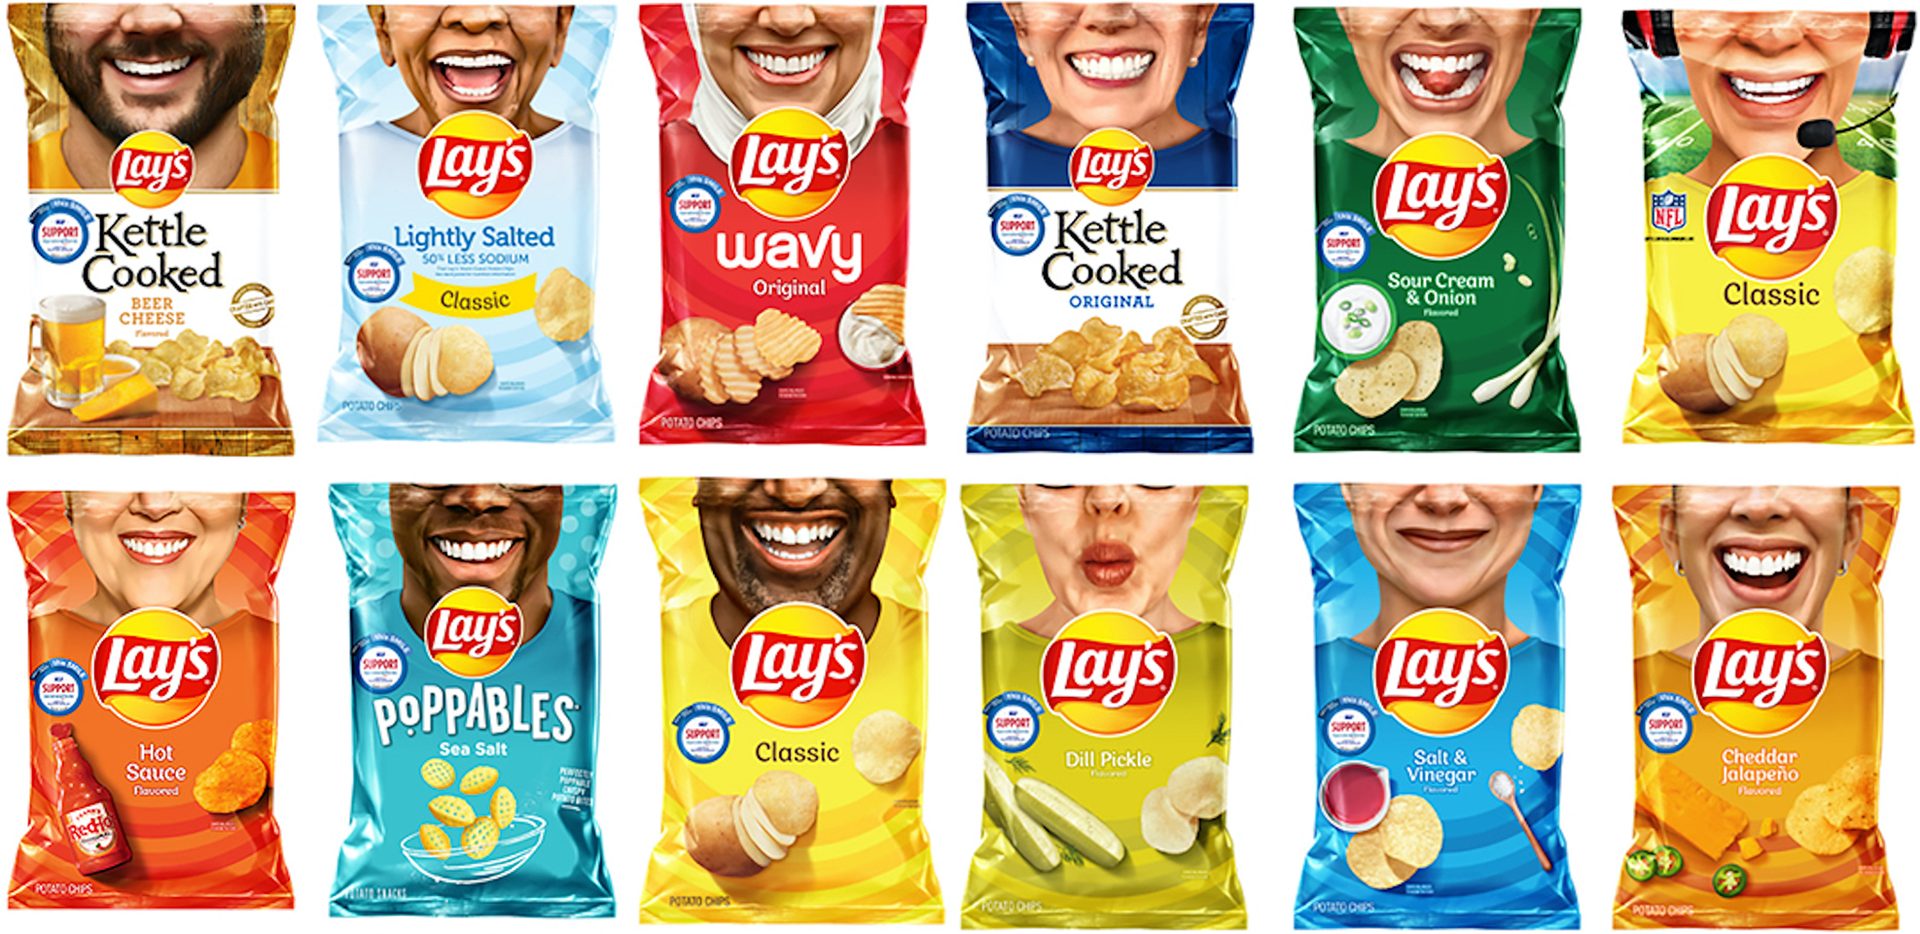 Lays faces